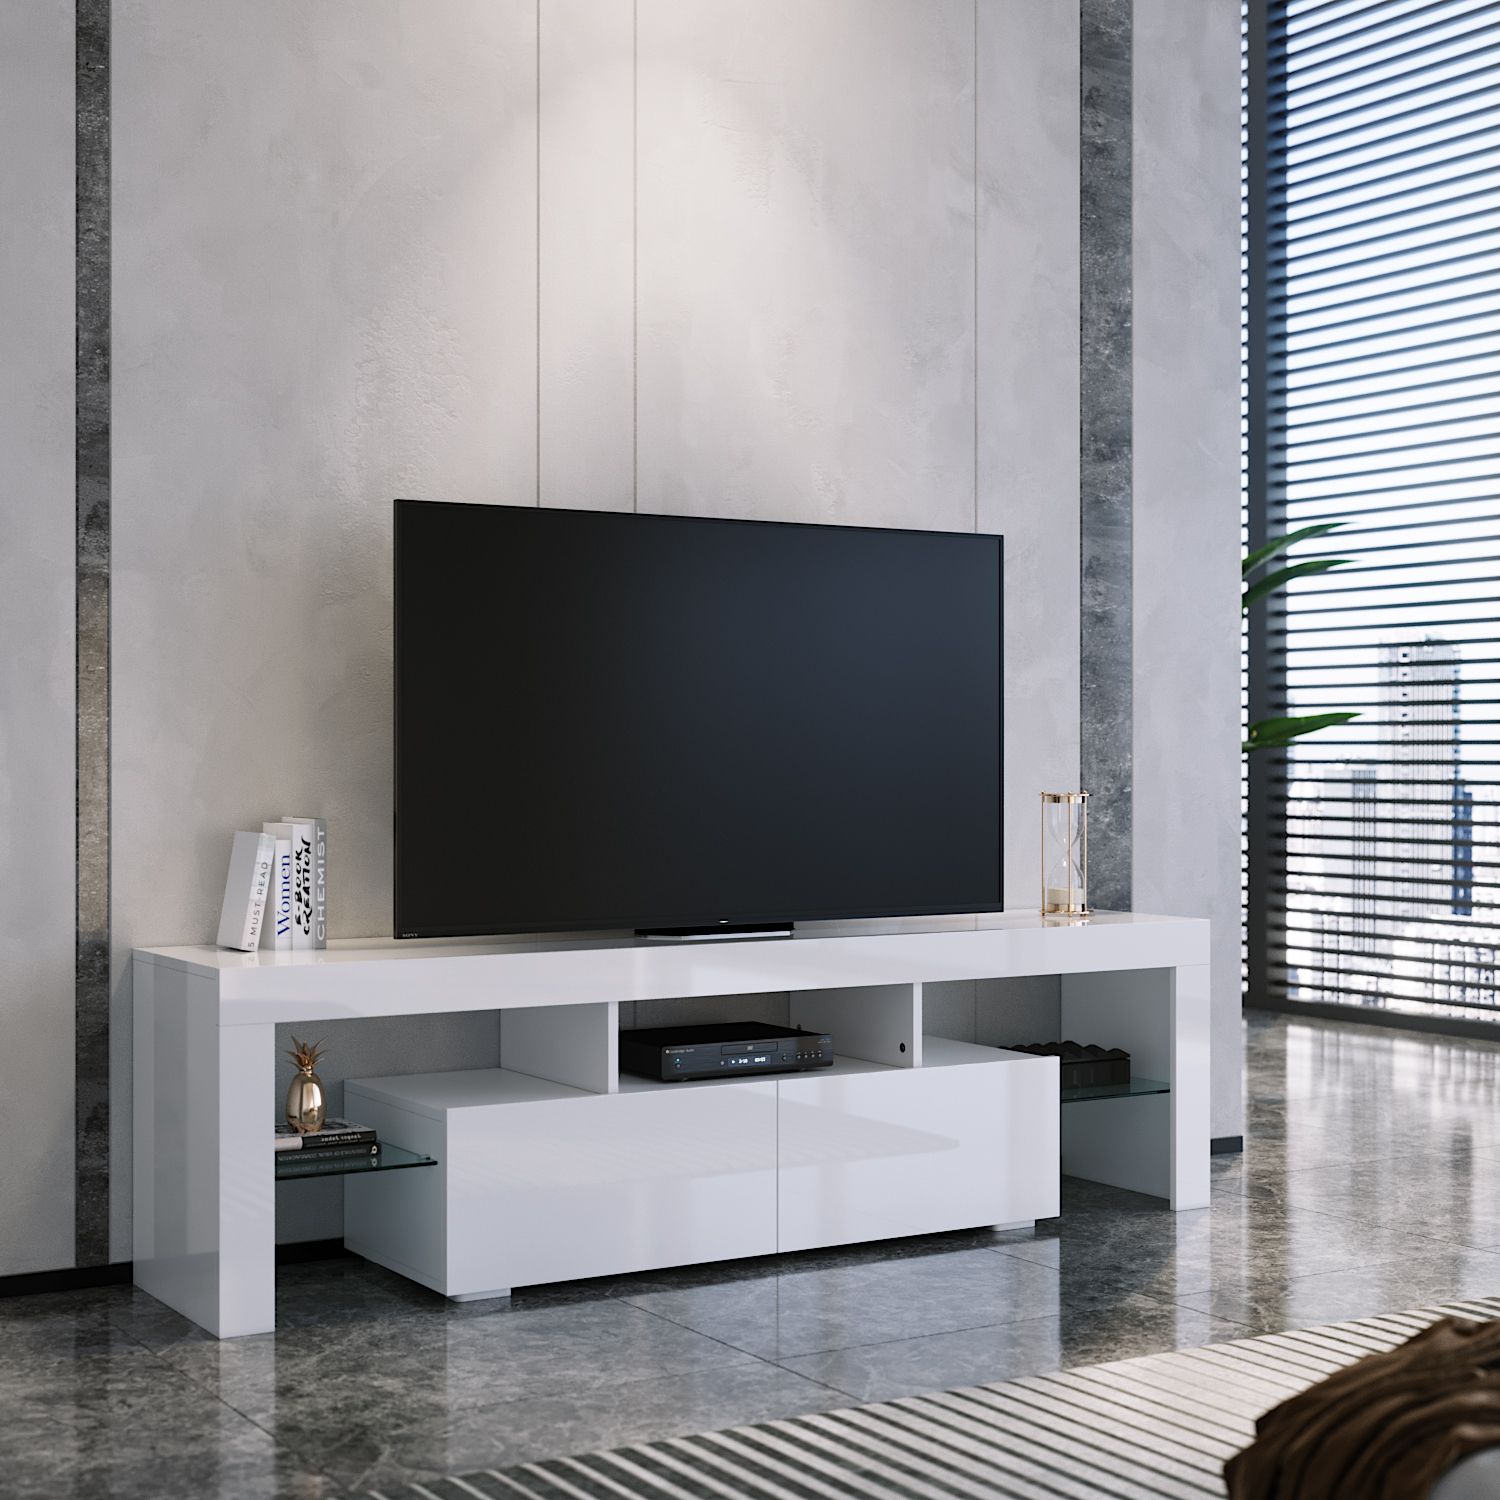 Modern 160cm Tv Unit Stand Matt Body & High Gloss Doors Pertaining To 57'' Led Tv Stands With Rgb Led Light And Glass Shelves (View 14 of 15)